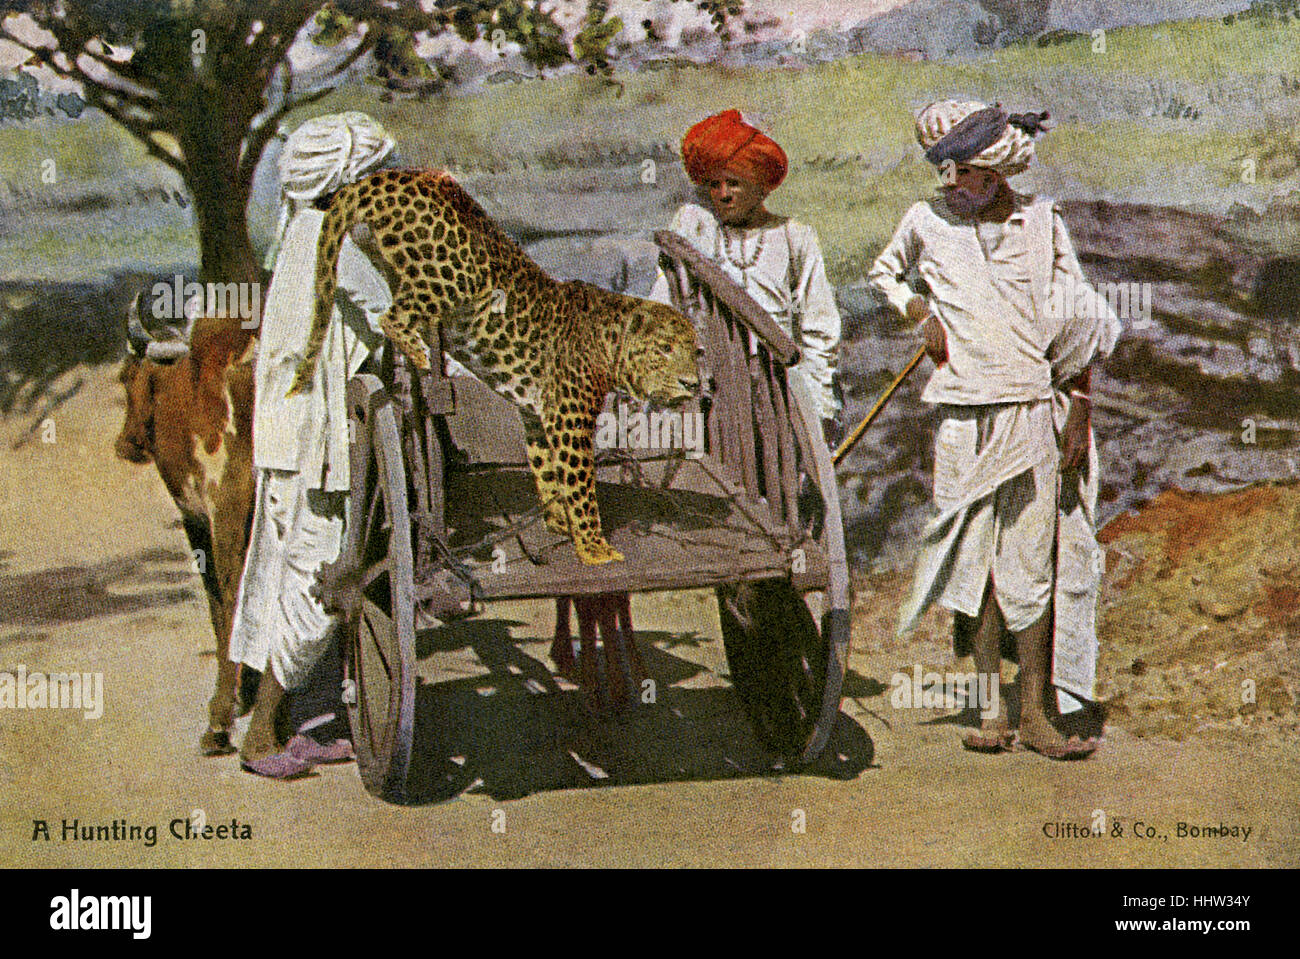 Men with Hunting cheetah chained on an ox-drawn cart, India.  Cheetah used in hunting because it can run incredibly fast. Stock Photo